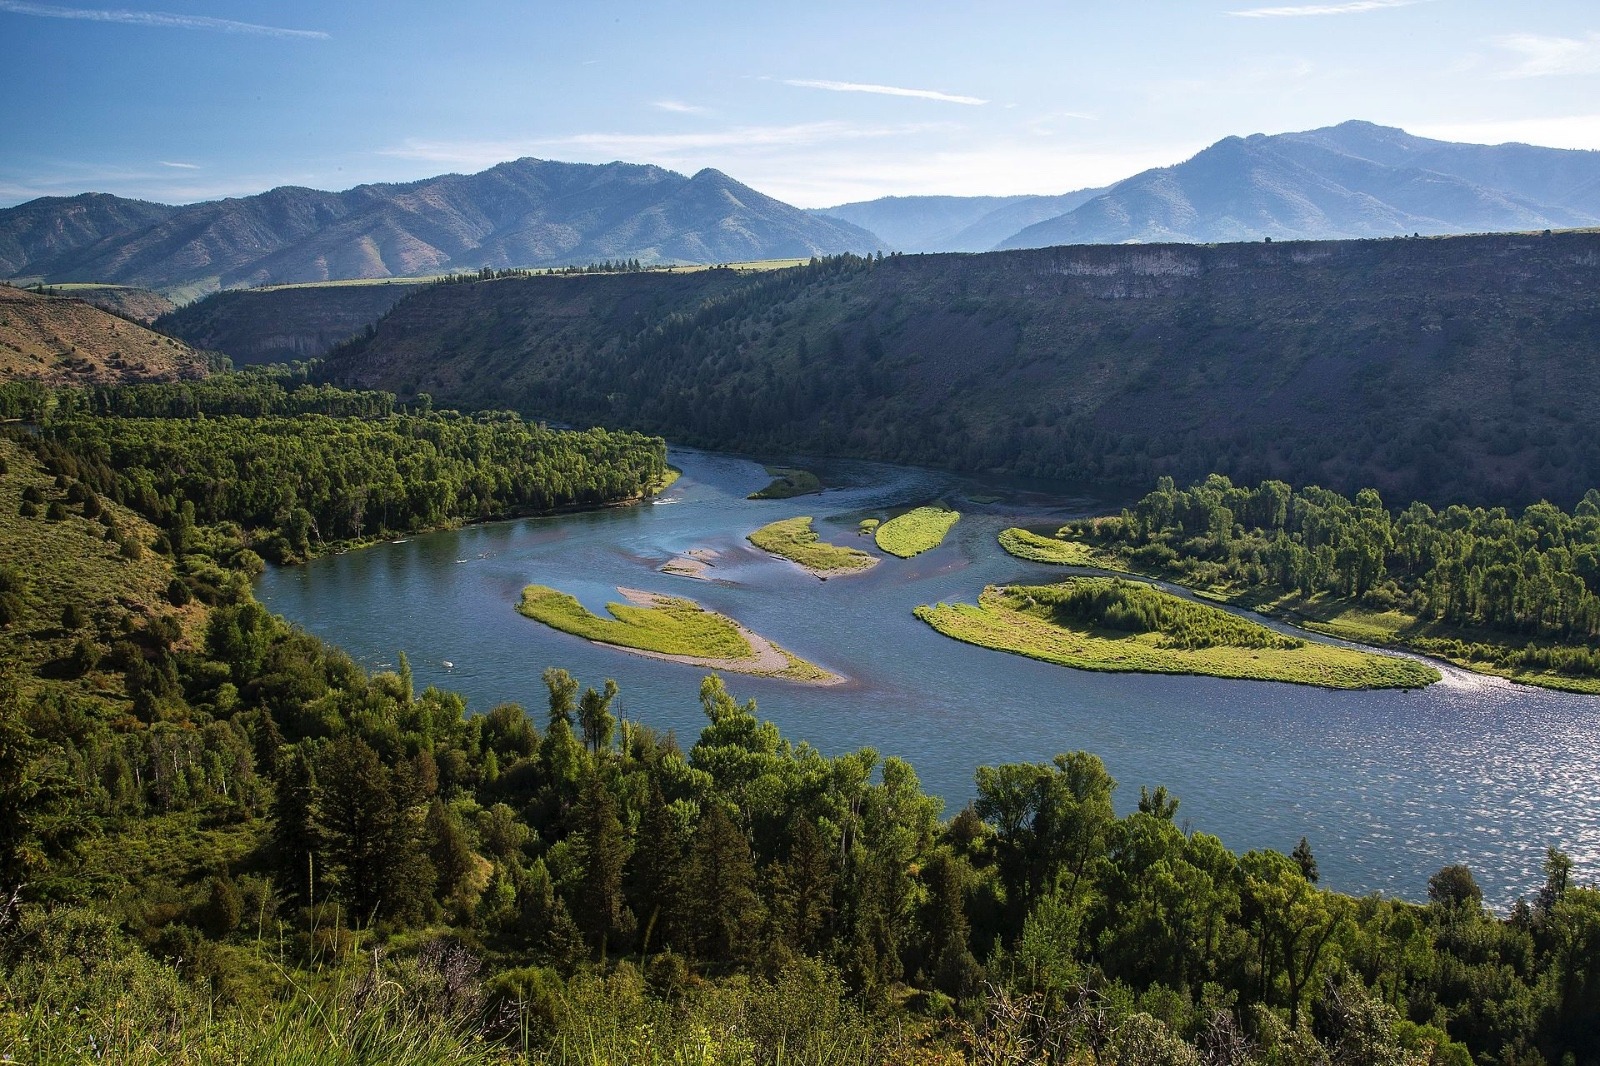 The South Fork of the Snake River in Idaho managed by the BLM. Imagine if, instead of it being protected, this popular stretch was lined by trophy homes and/or turned into a water park.  As Newcomb notes, unimpaired places always demonstrate their higher intangible value over time. And once they are gone you can't get them back.  Photo courtesy Bureau of Land Management.